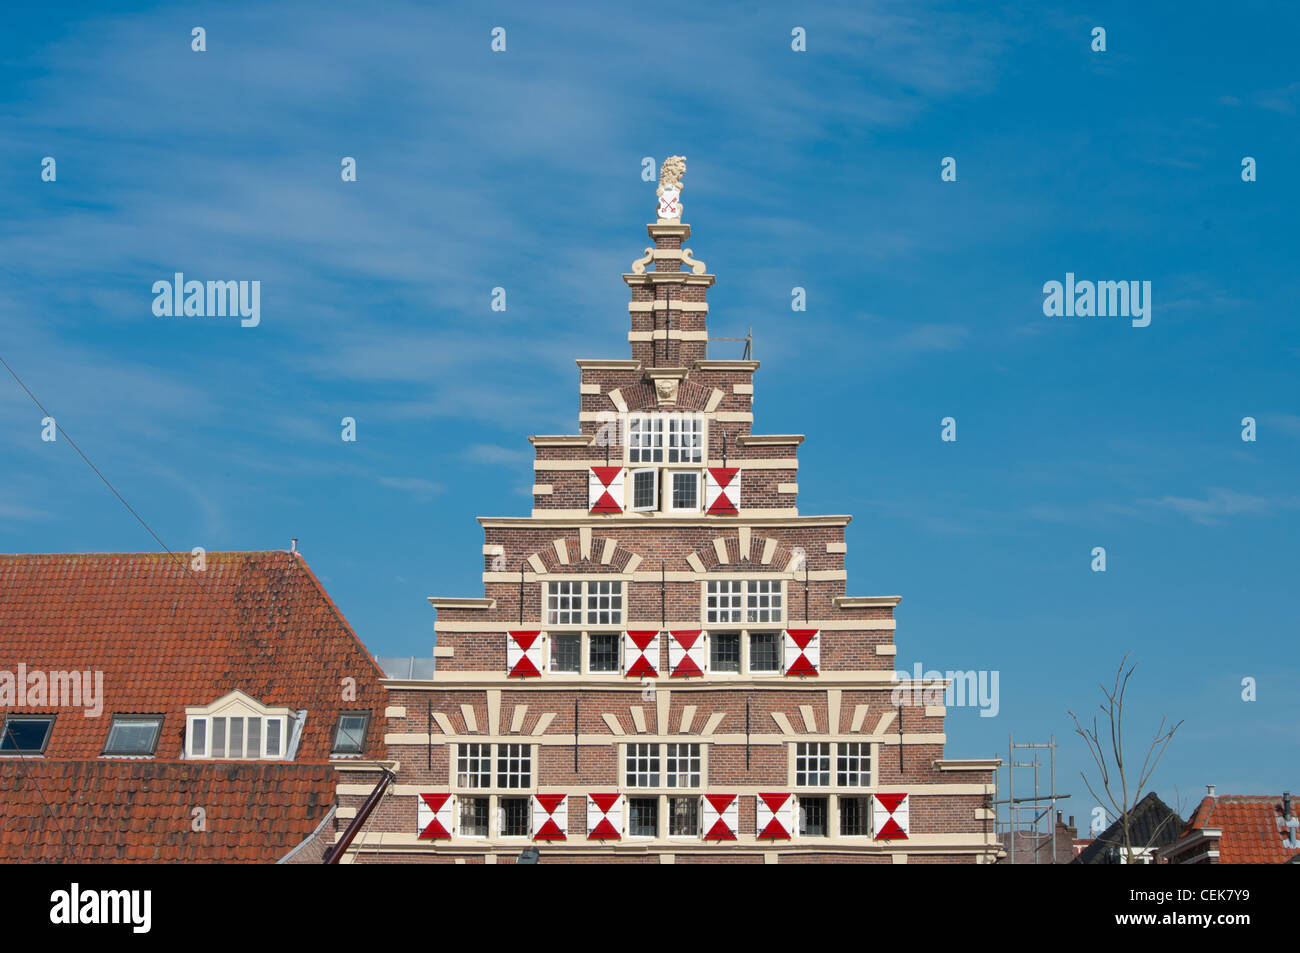 facade of a monumental house in Leiden, Netherlands Stock Photo